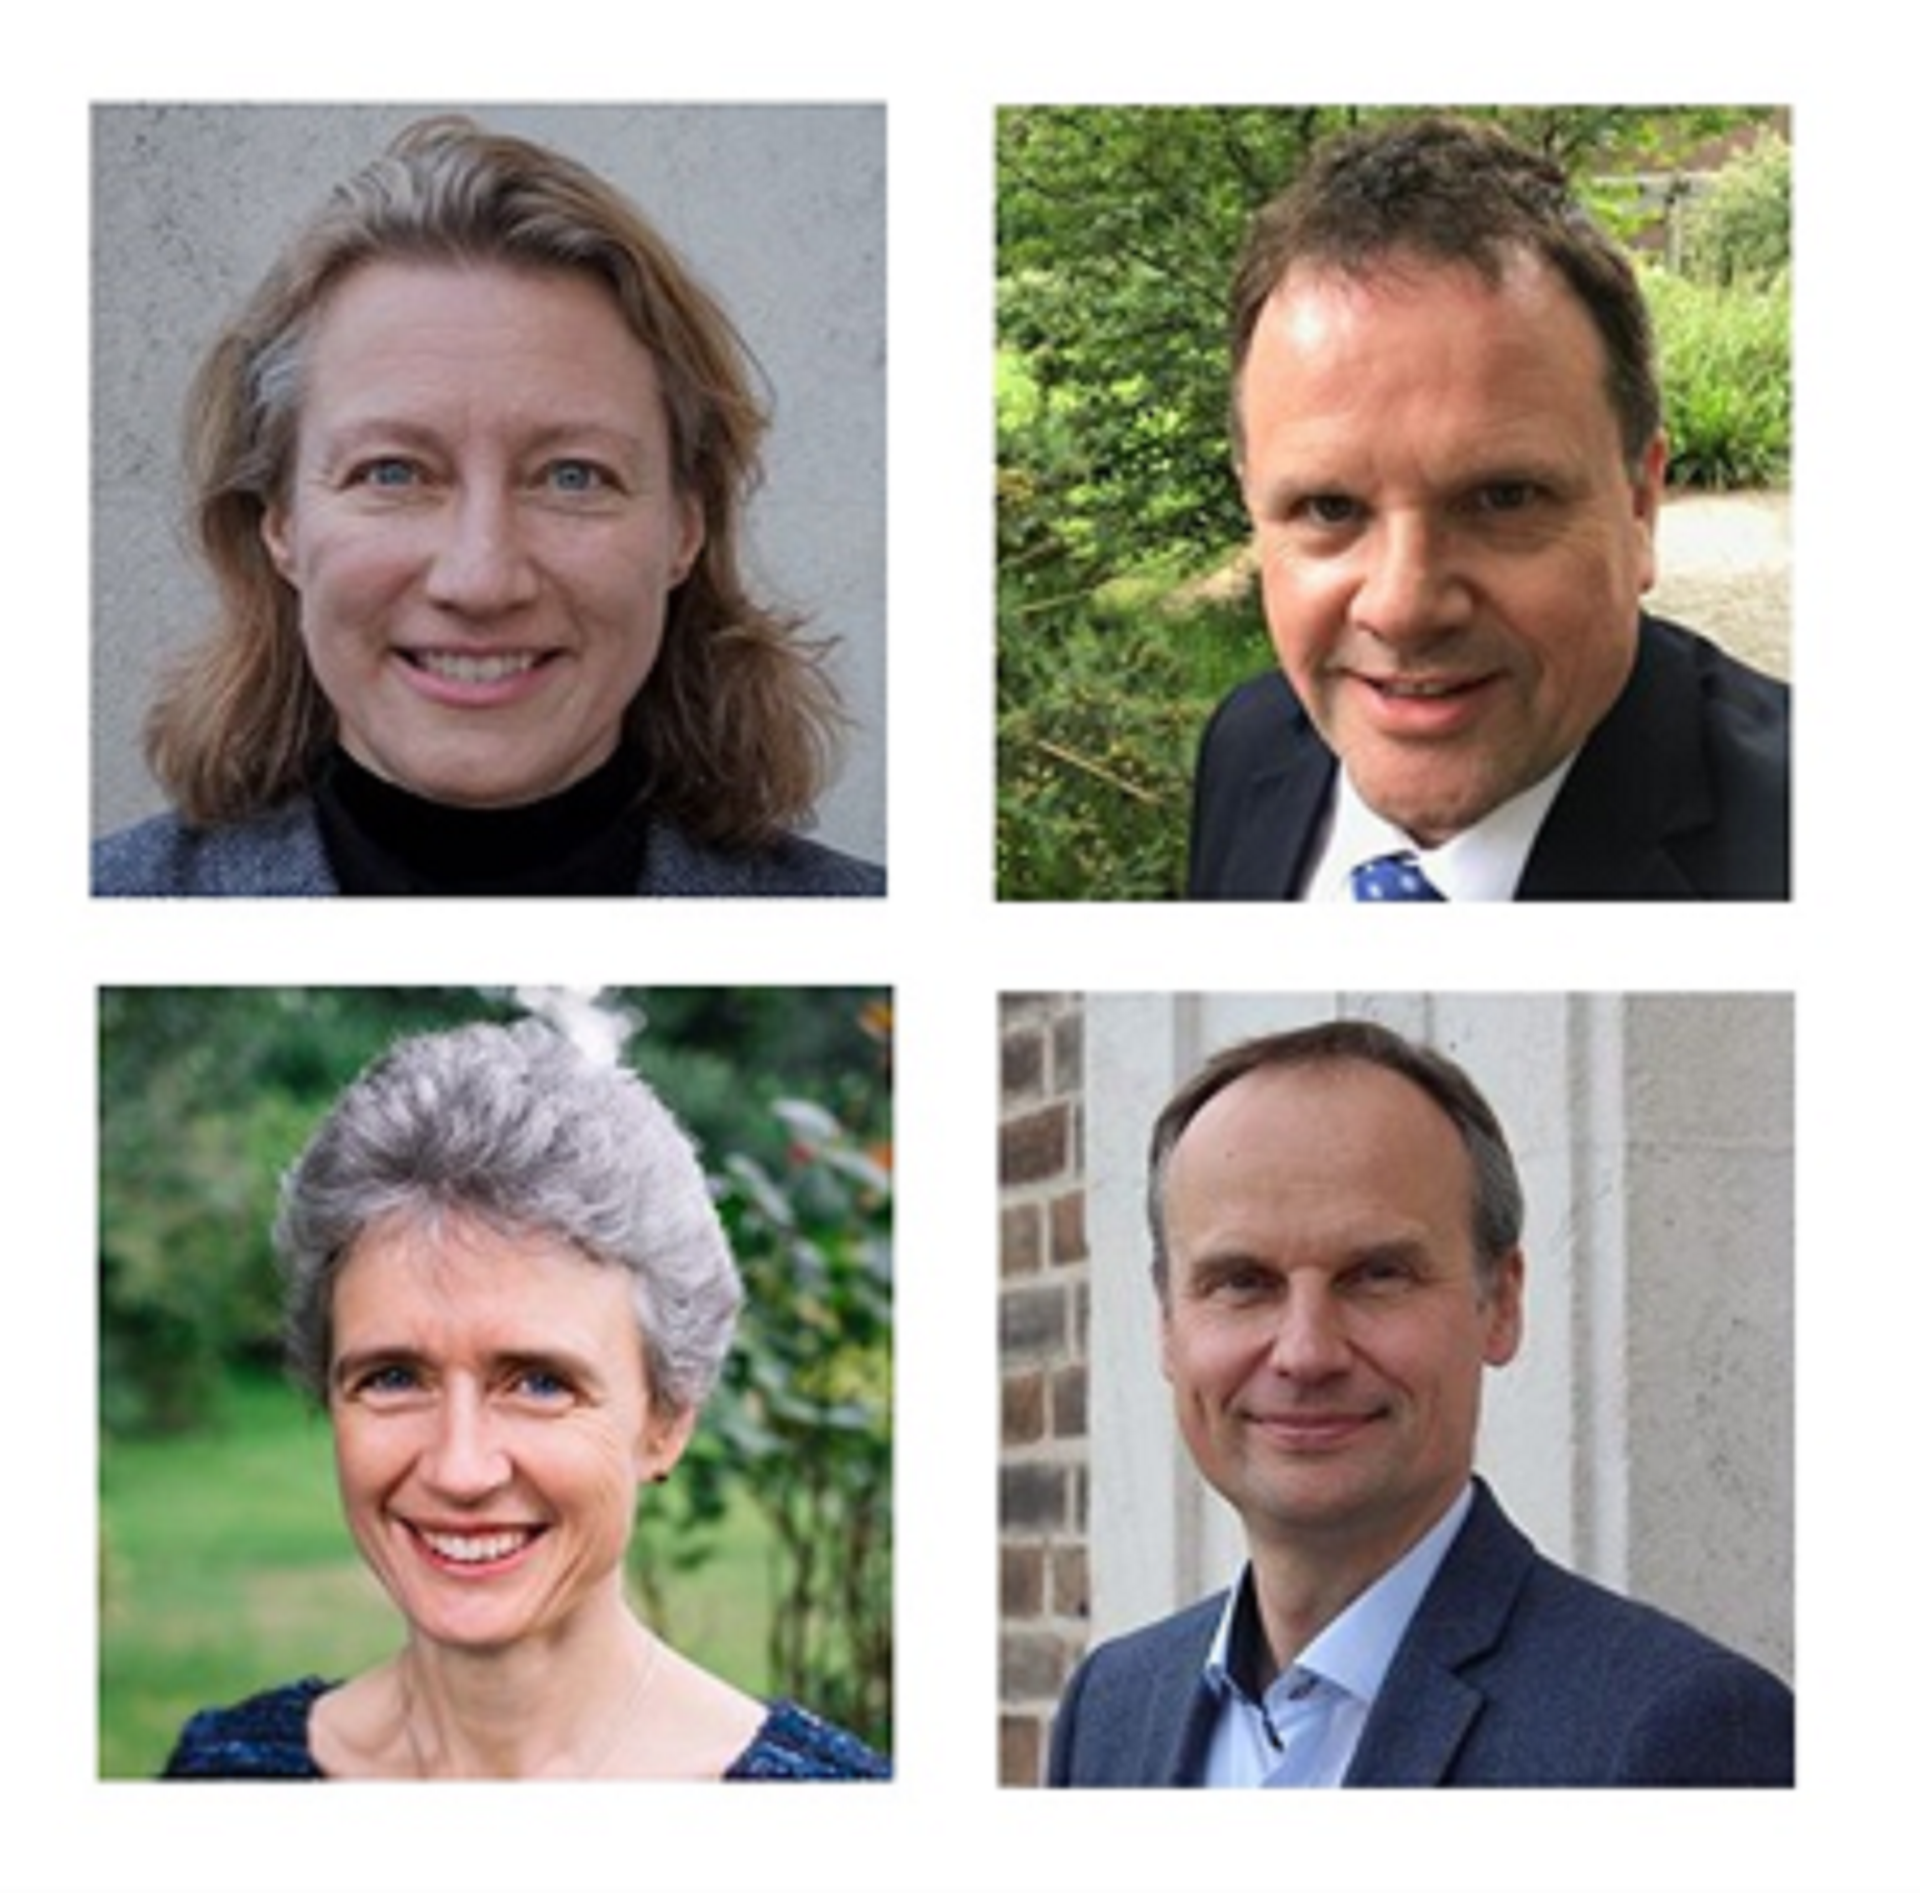 Top left to bottom right: Professor Larissa Fabritz, Honorary Professor and lead author of the study. Professor Derek Connolly, Honorary Senior Clinical Lecturer, Professor Kate Jolly, Professor of Public Health and Primary Care, and Professor Paulus Kirchhof, Honorary Professor. All authors of the study with affiliations with the University of Birmingham.